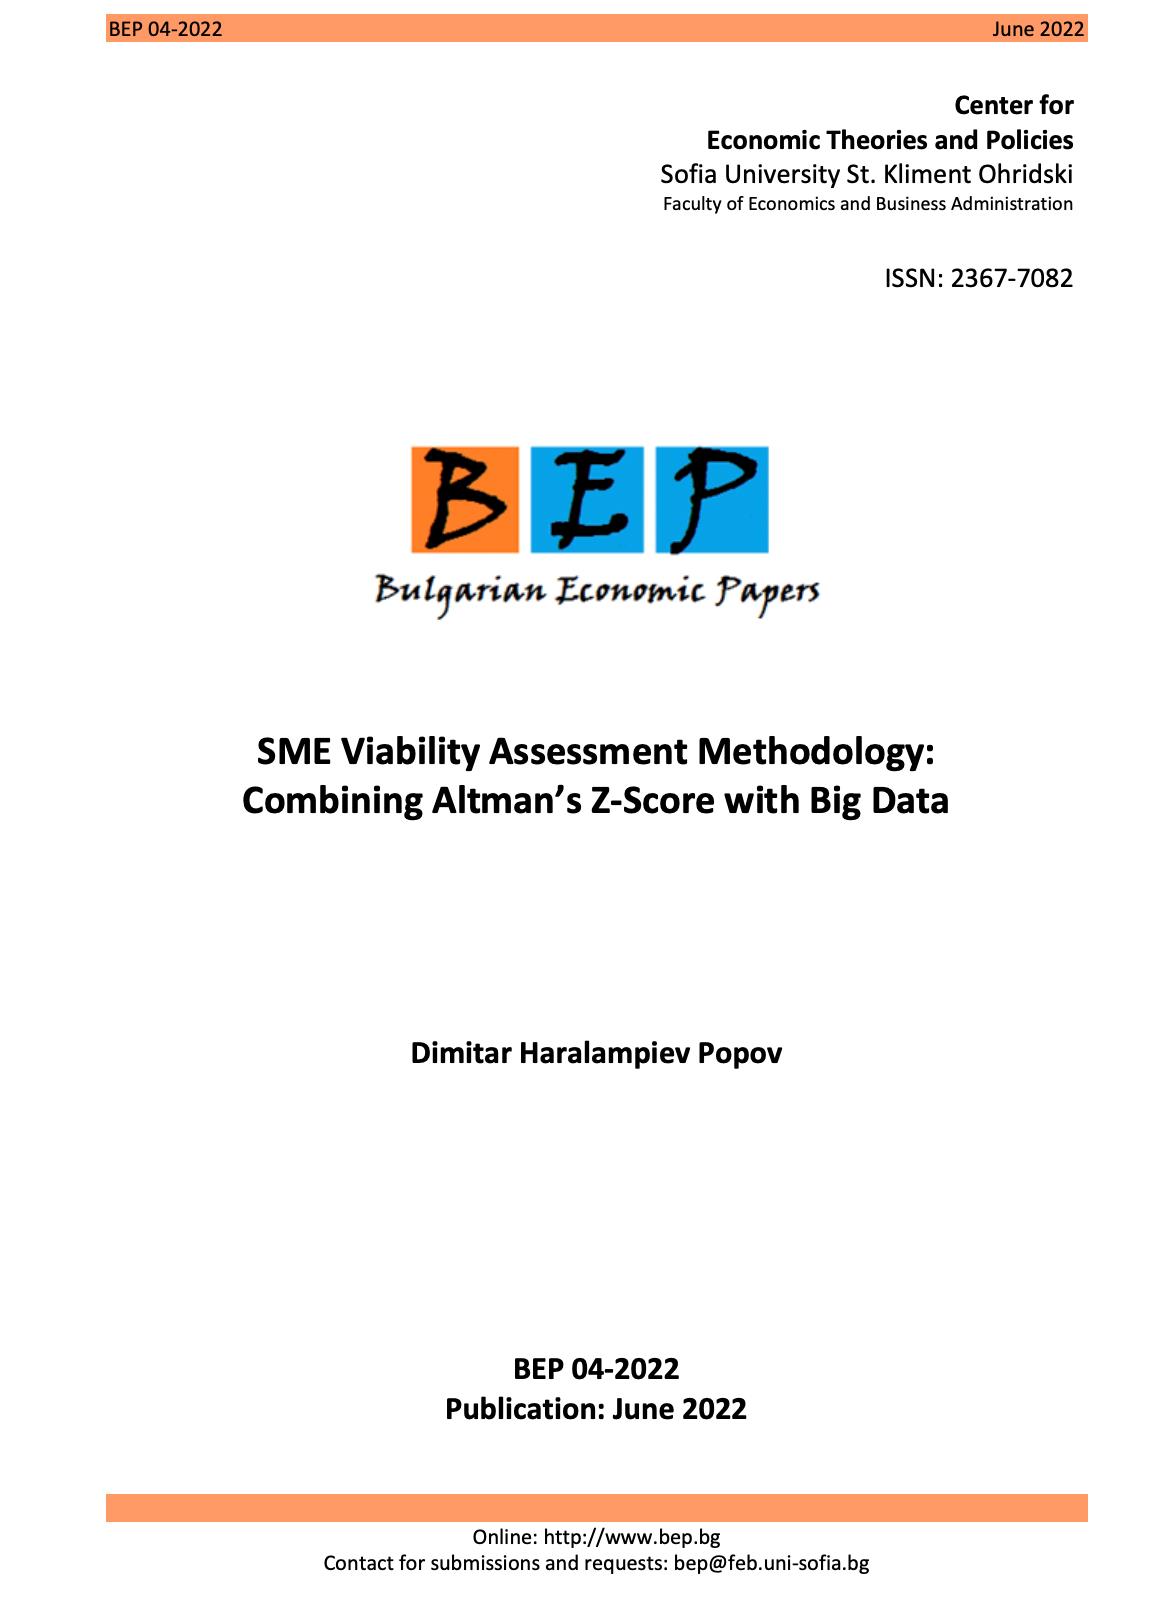 SME Viability Assessment Methodology: Combining Altman’s Z-Score with Big Data (1999-2020) Cover Image